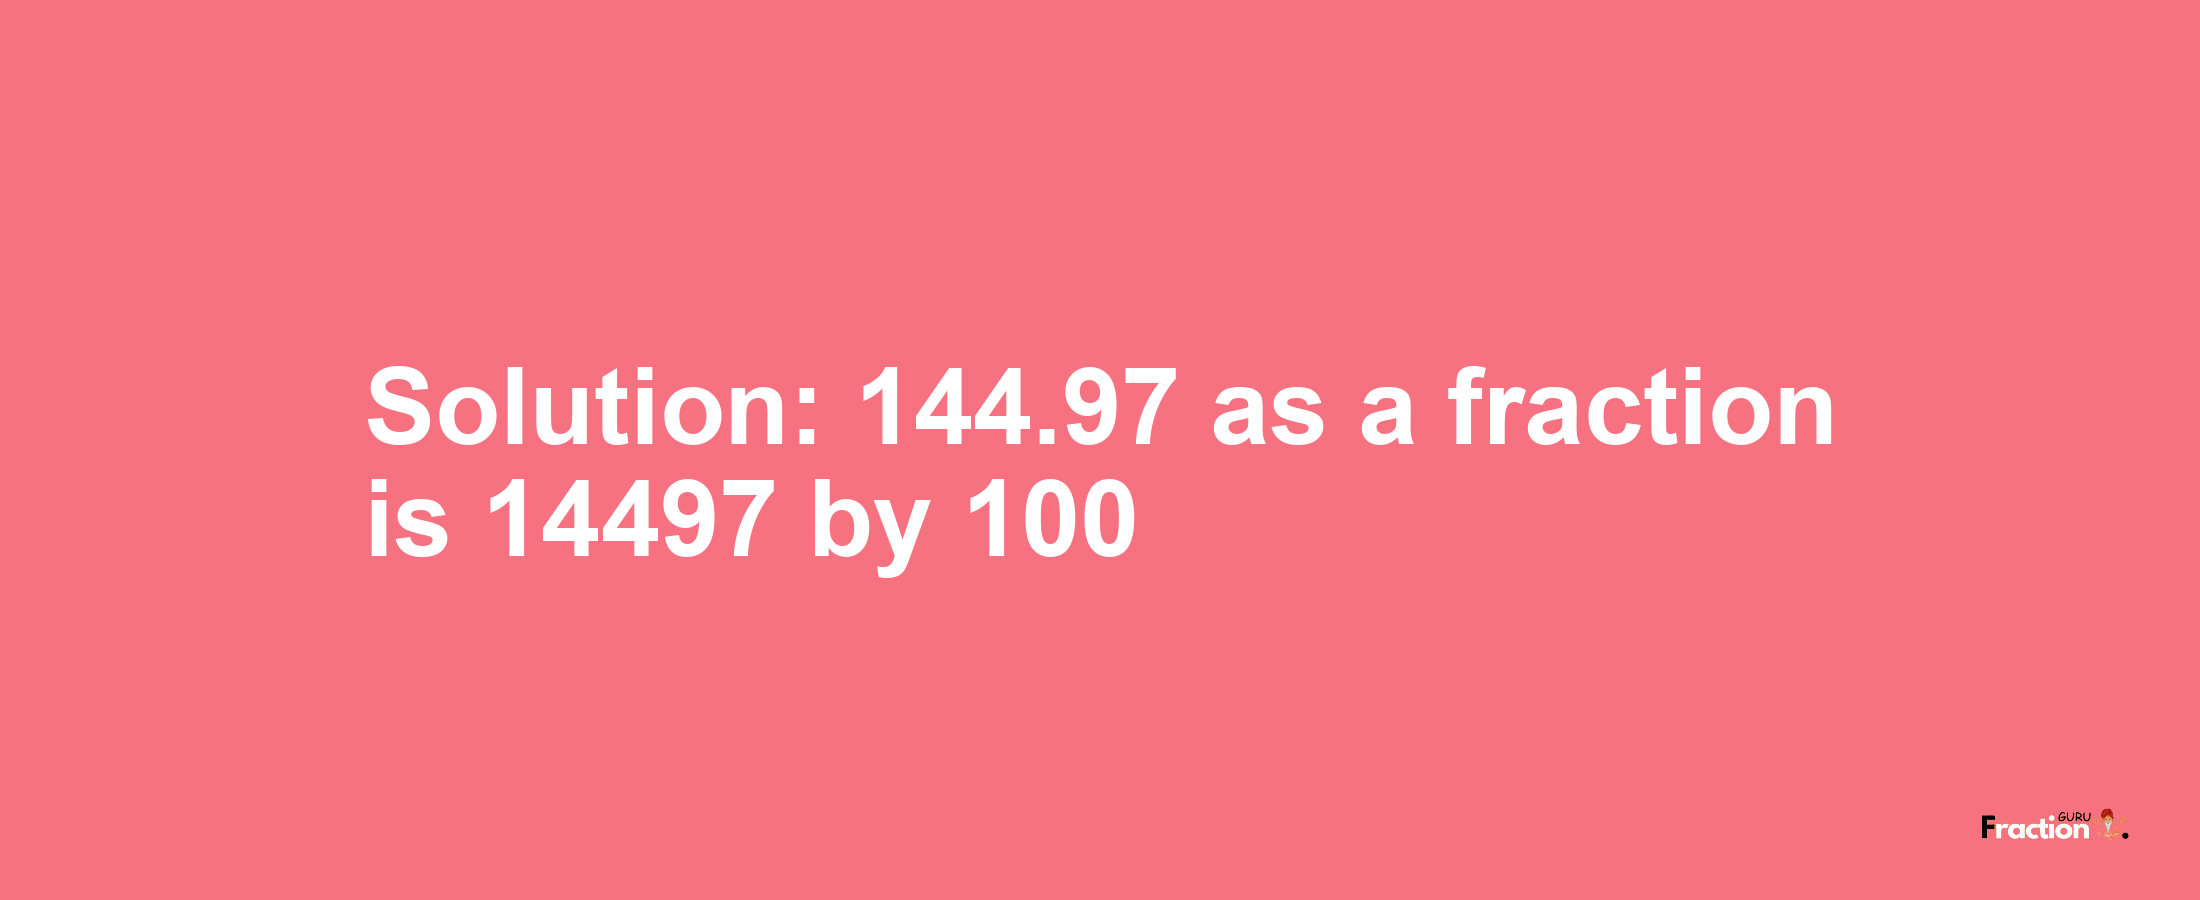 Solution:144.97 as a fraction is 14497/100